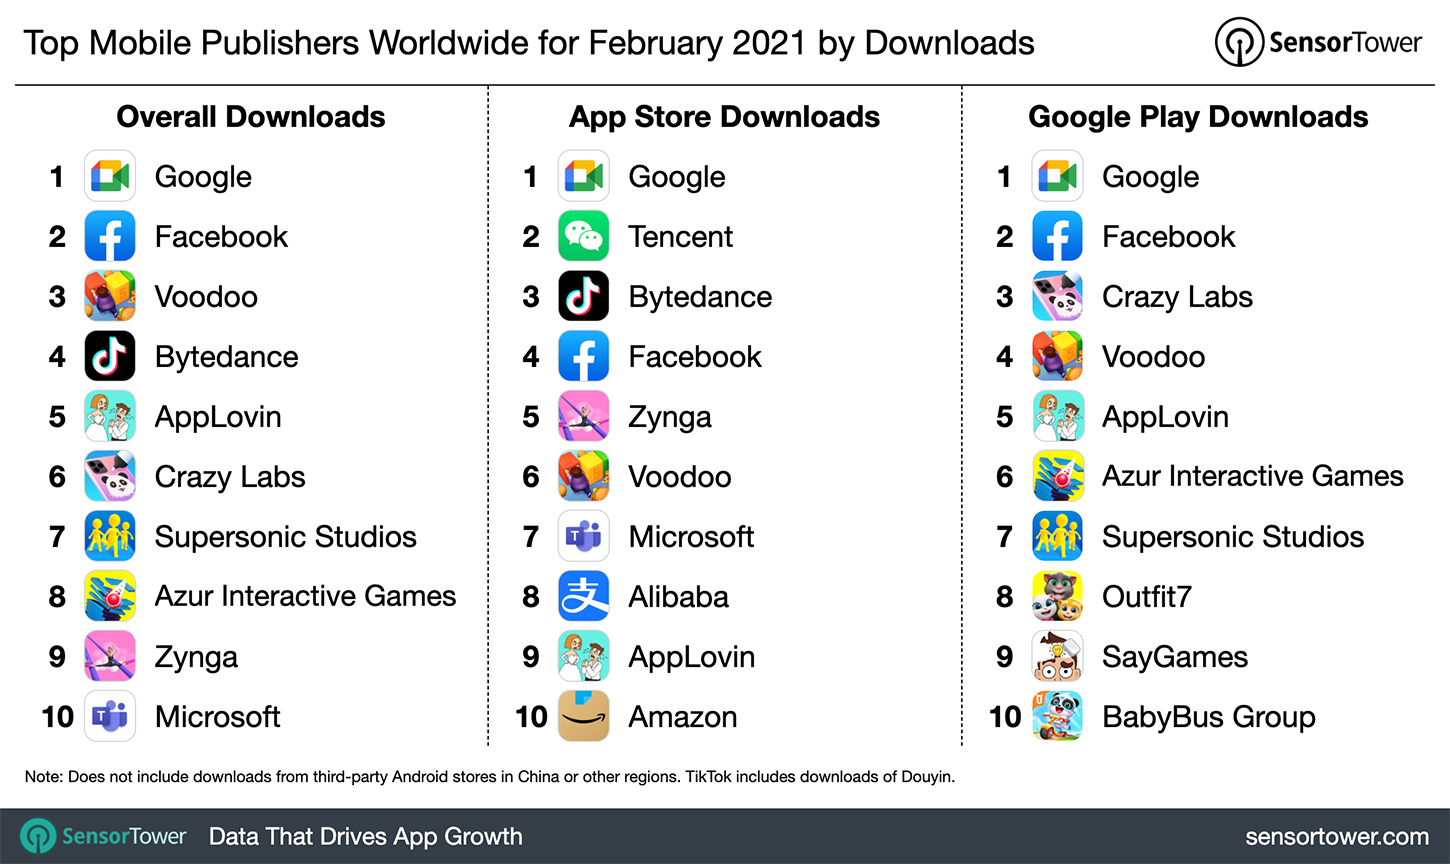 Top Mobile Publishers Worldwide for February 2021 by Downloads